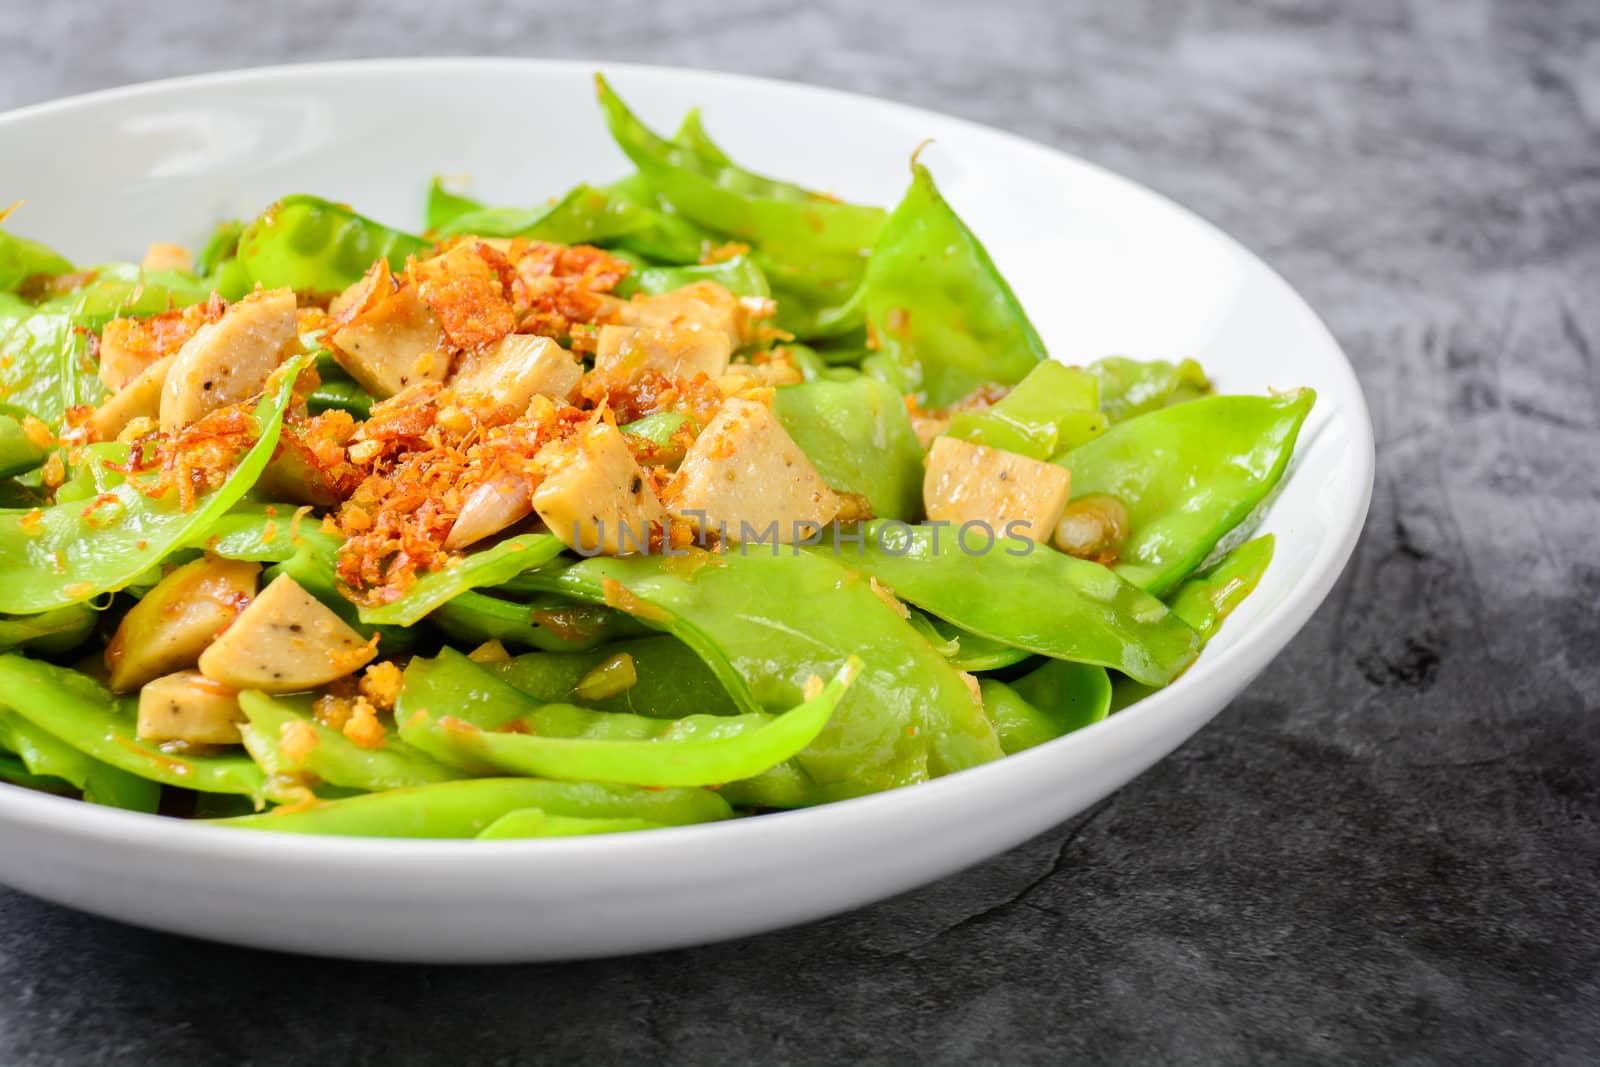 Stir Fry Snow Peas with Vietnamese Grilled Pork Sausage, topping by yuiyuize